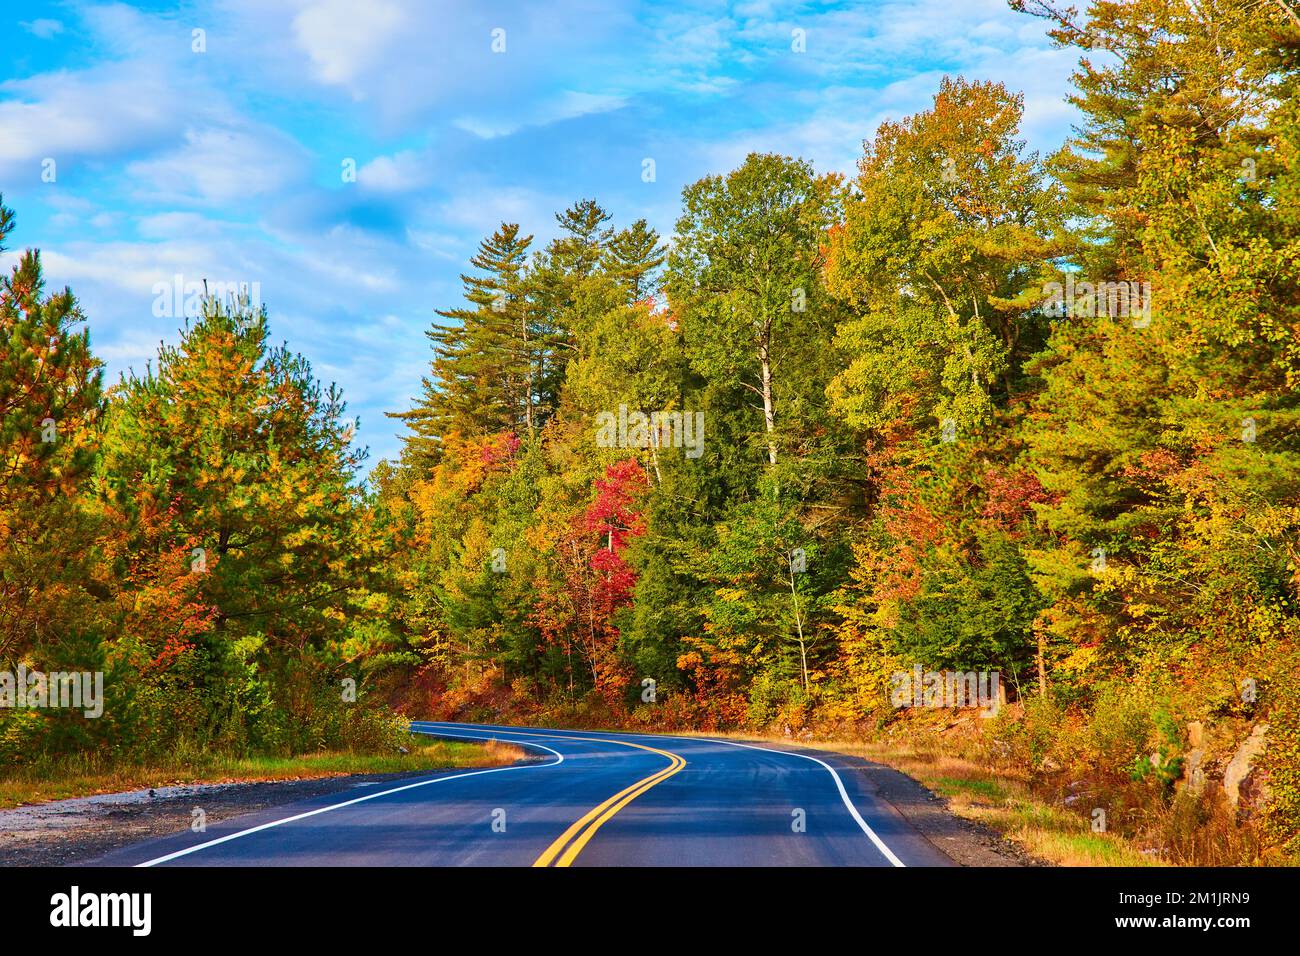 Road winding through fall forests with blue skies Stock Photo